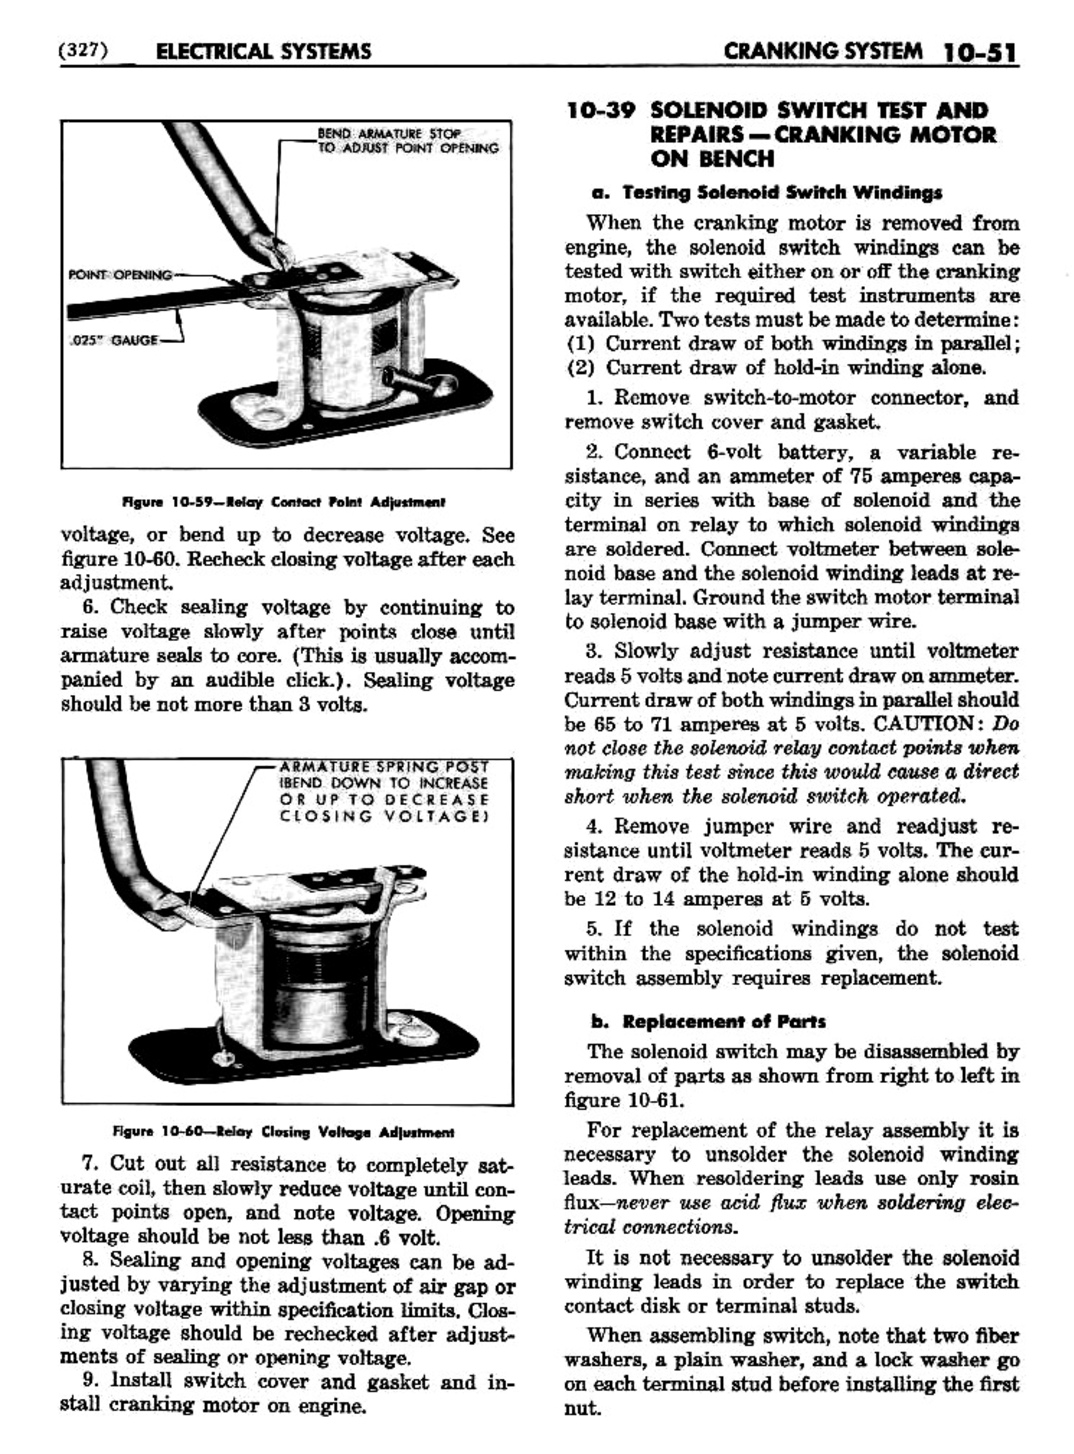 n_11 1948 Buick Shop Manual - Electrical Systems-051-051.jpg